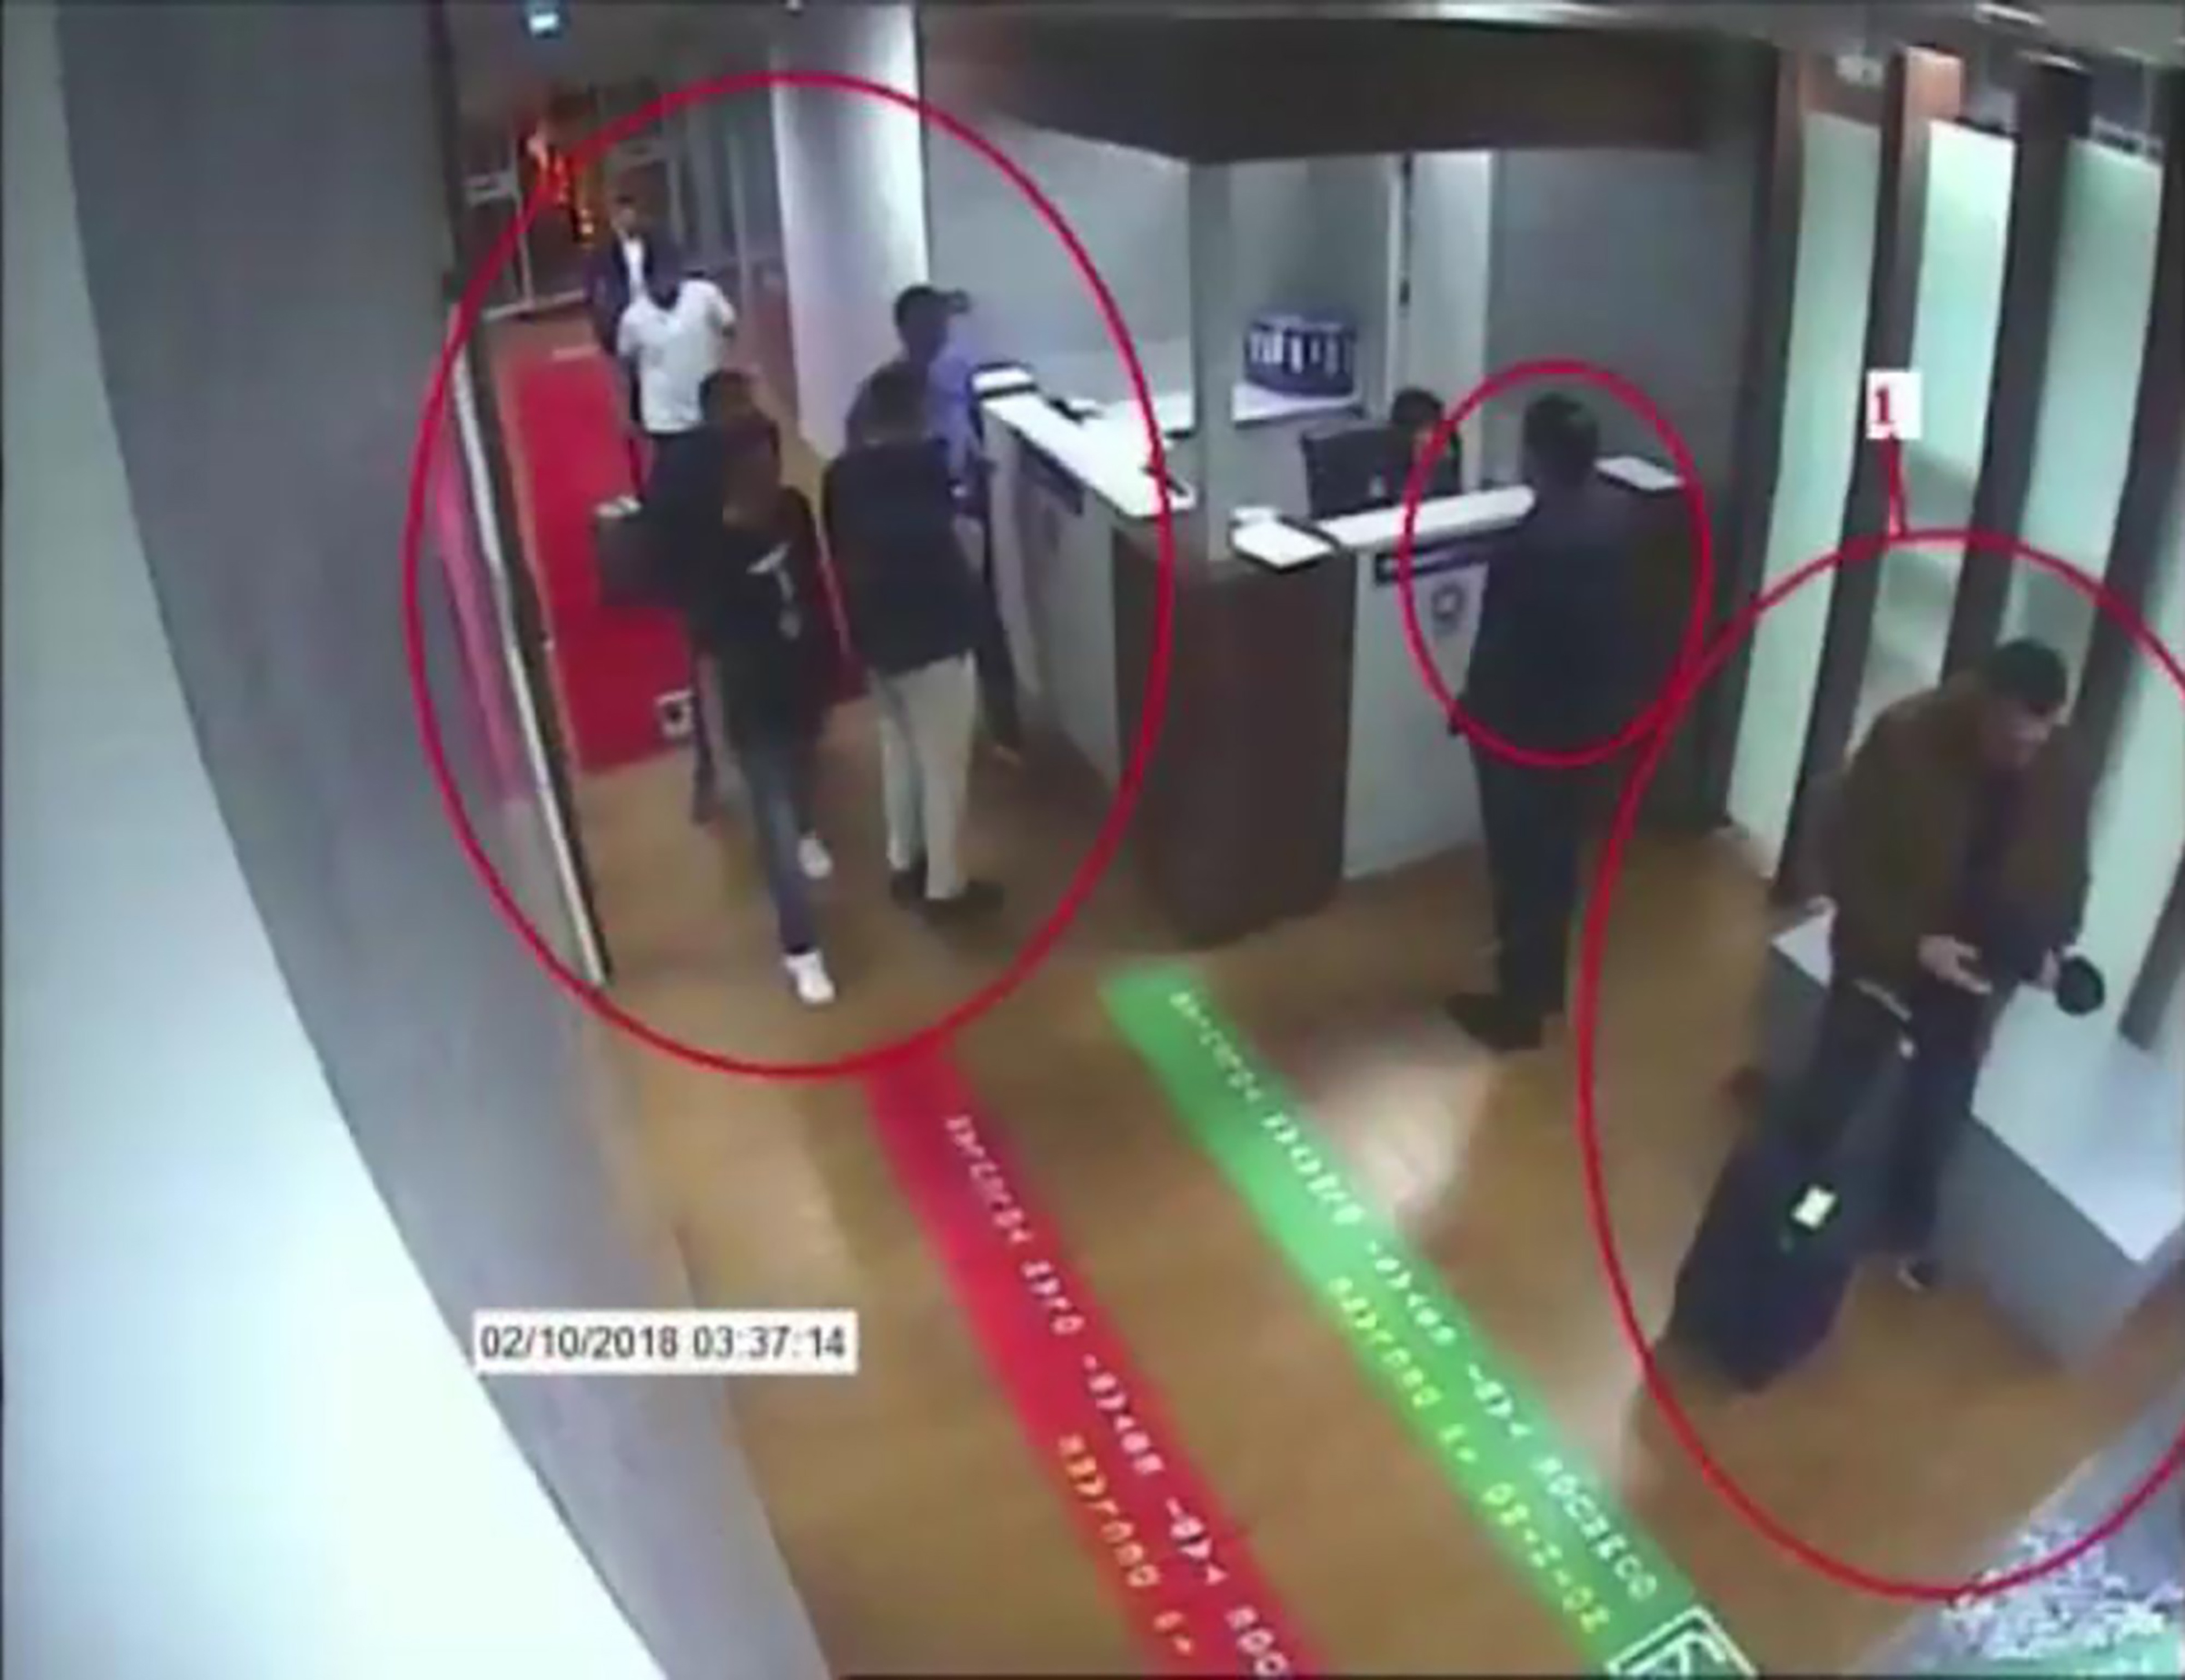 CCTV footage from Oct. 2 shows a Saudi jet at Istanbul’s Ataturk airport, suspects at the airport and Khashoggi entering the Saudi consulate that day (AFP/Getty Images)